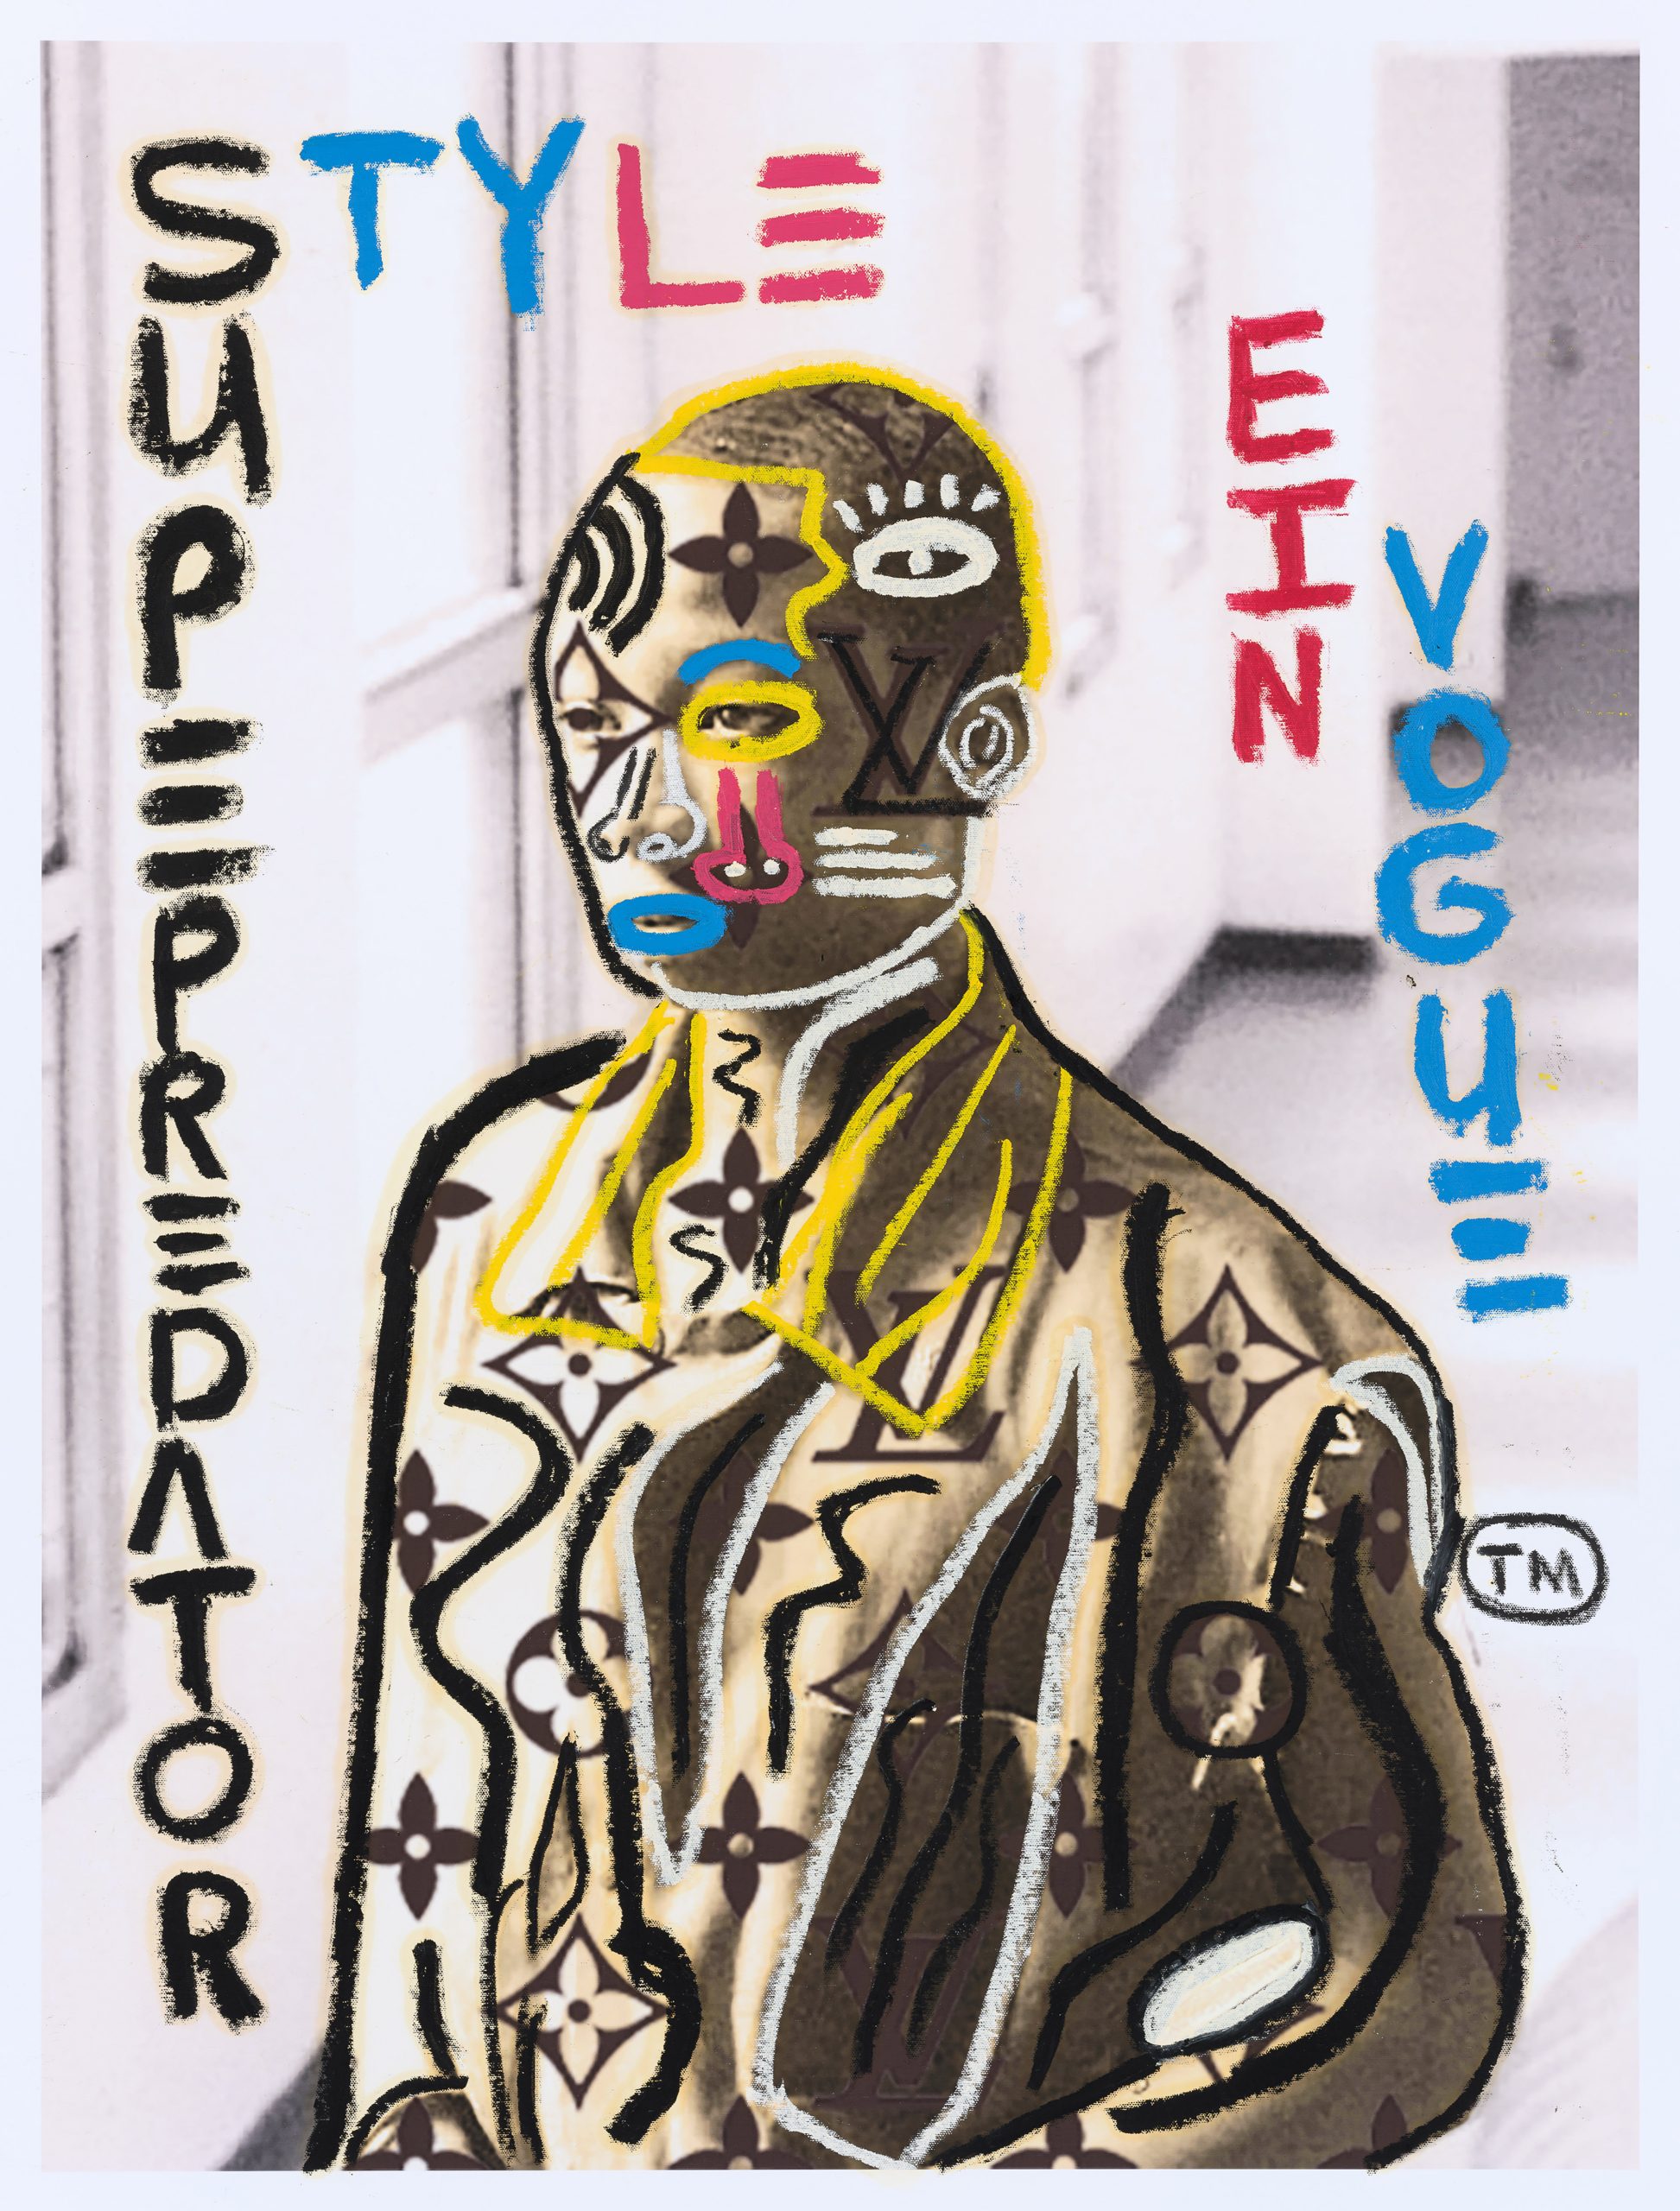 A photographic image of a Black youth, the artist Halim Flowers, at age 16 in DC Jail, overlaid with colorful lines and symbols from designer fashion brands, with the brightly colored words 